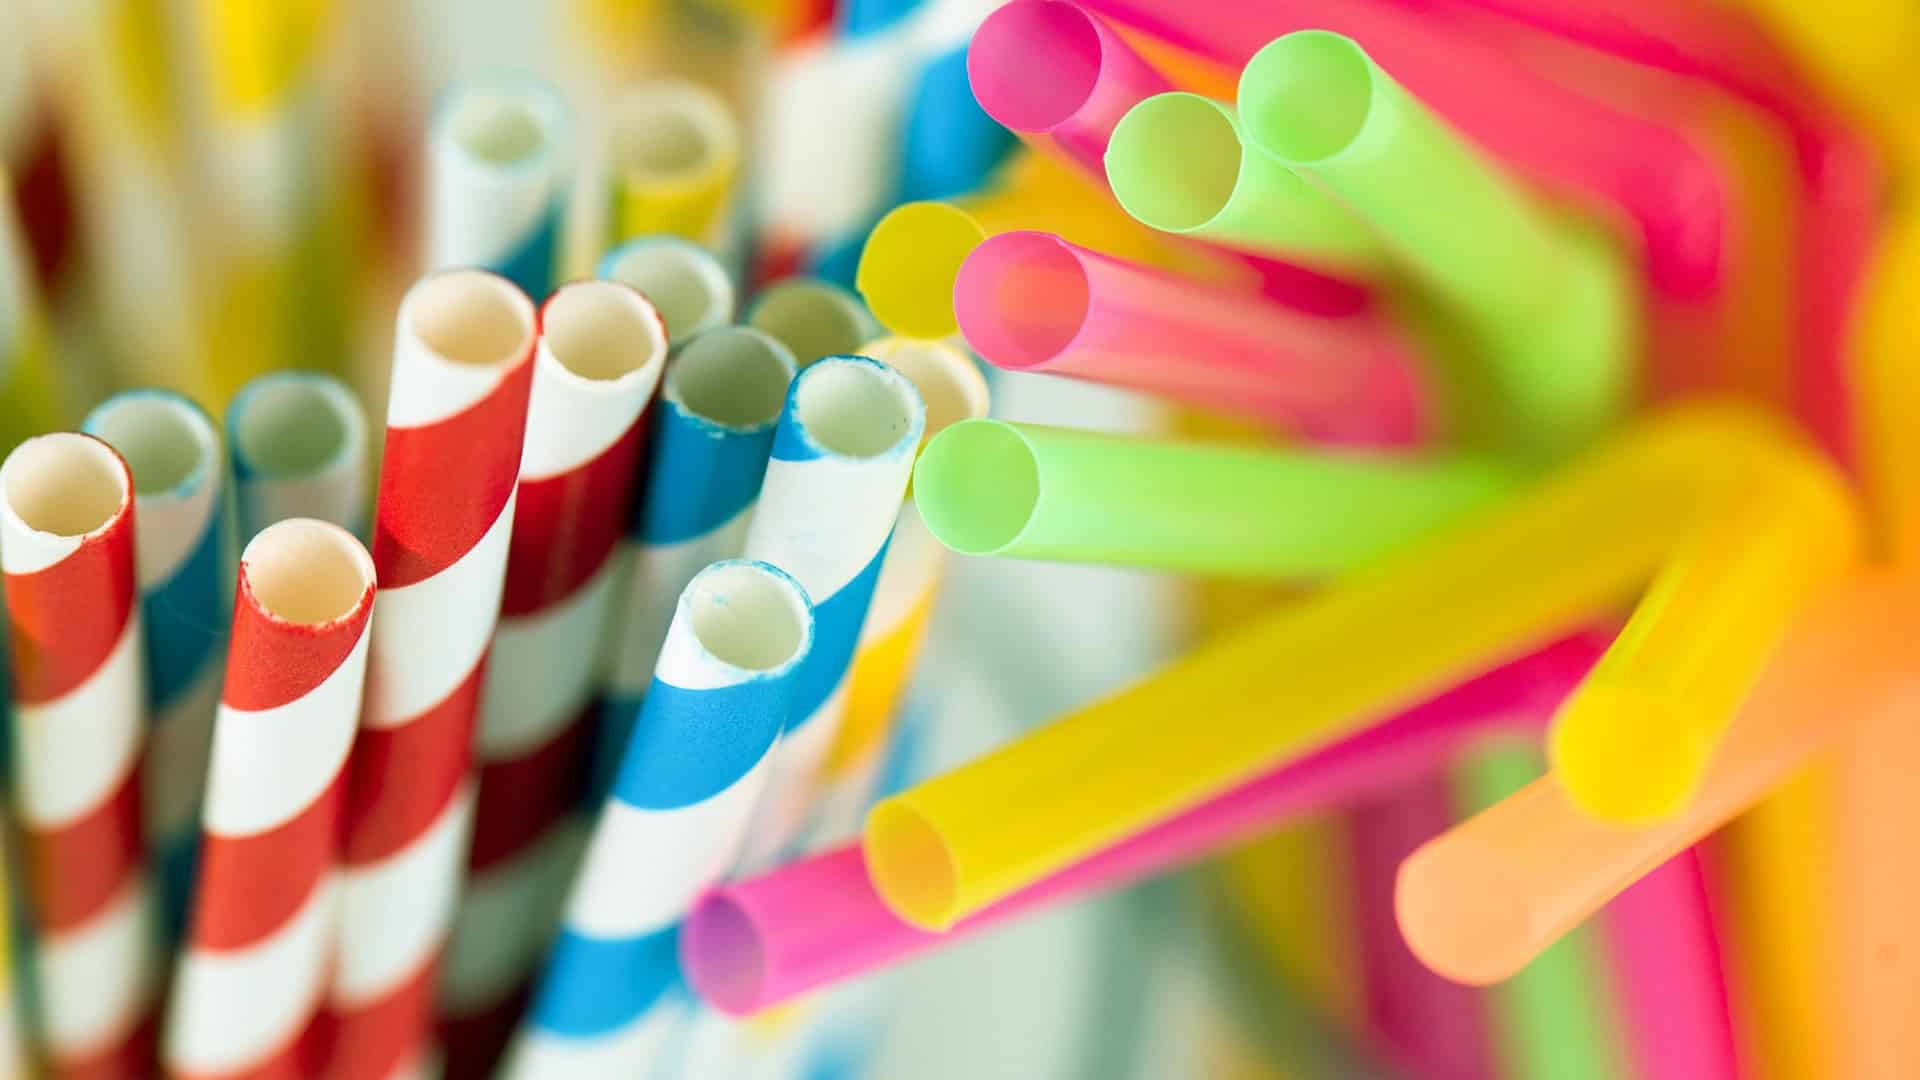 Plastic ban: Companies switch to paper straws